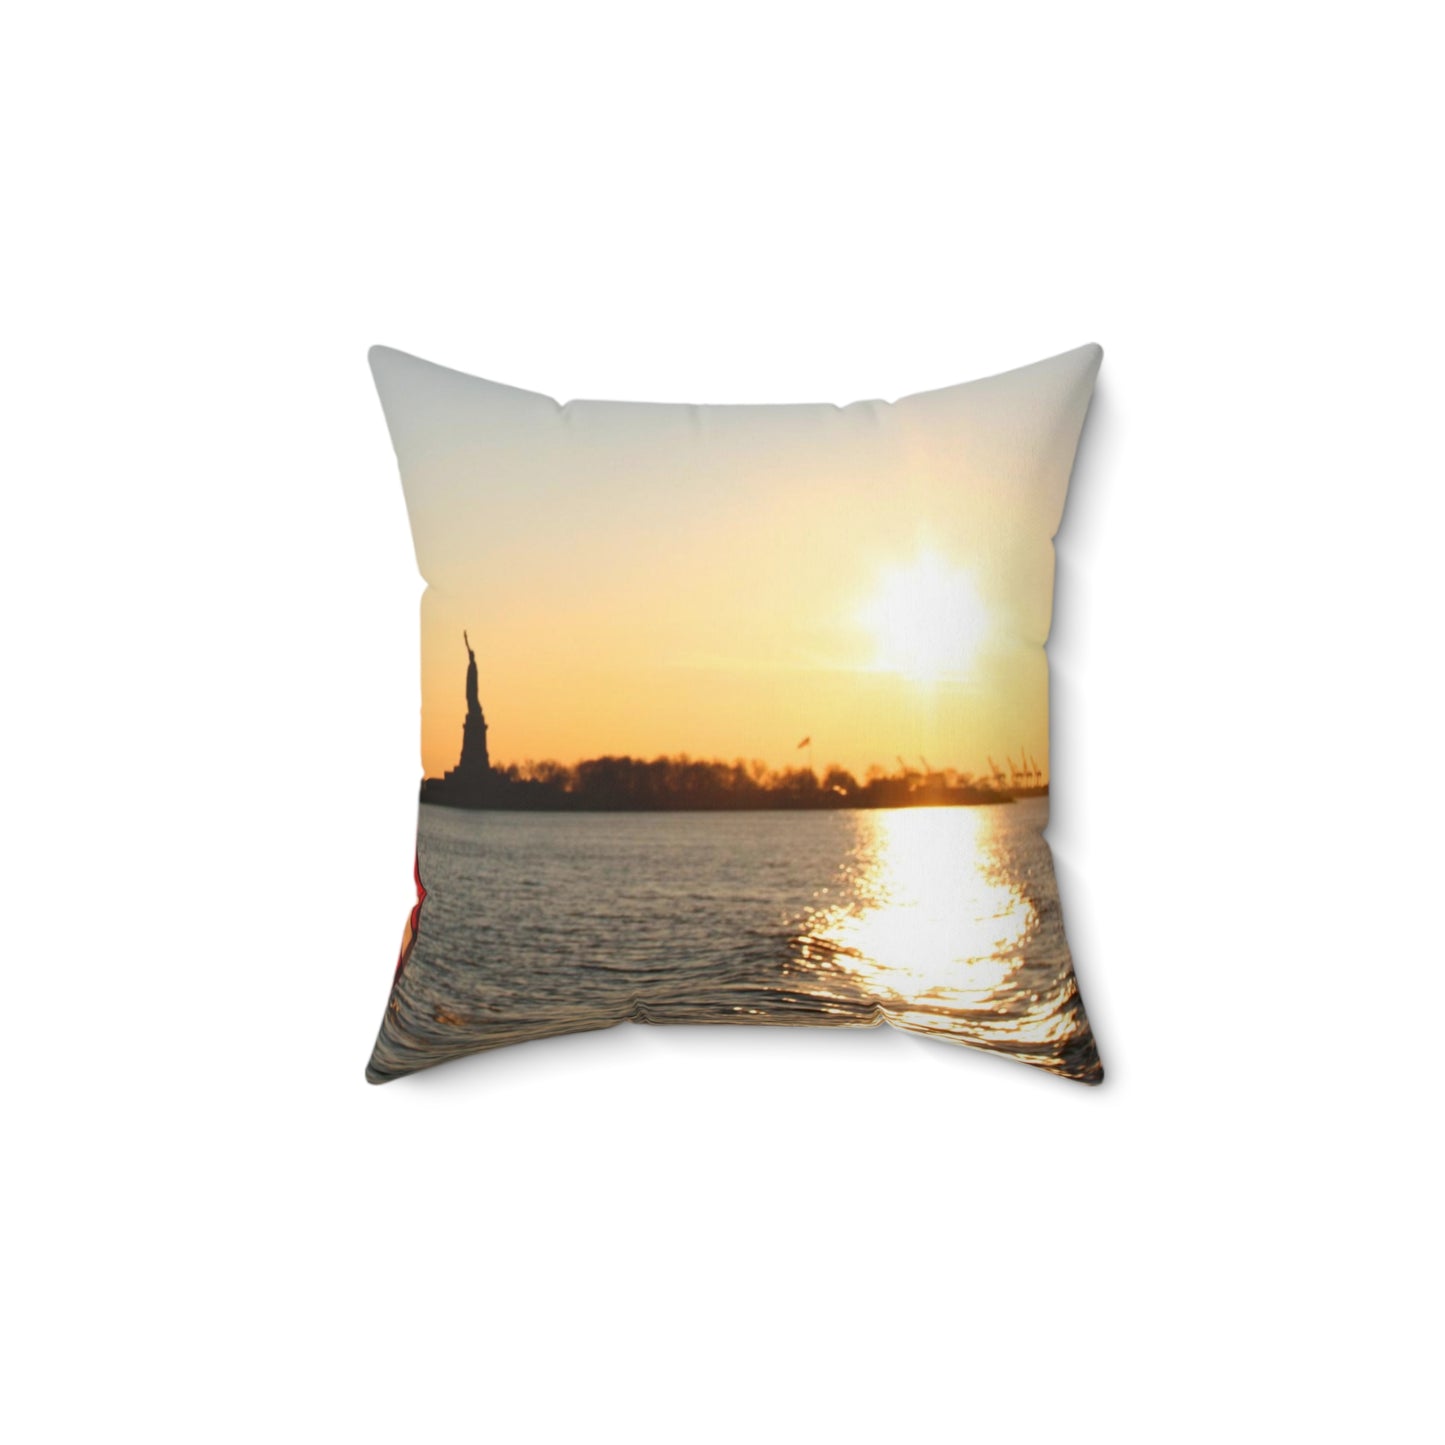 USA Flag with Statue of Liberty at Sunset - Spun Polyester Square Pillow